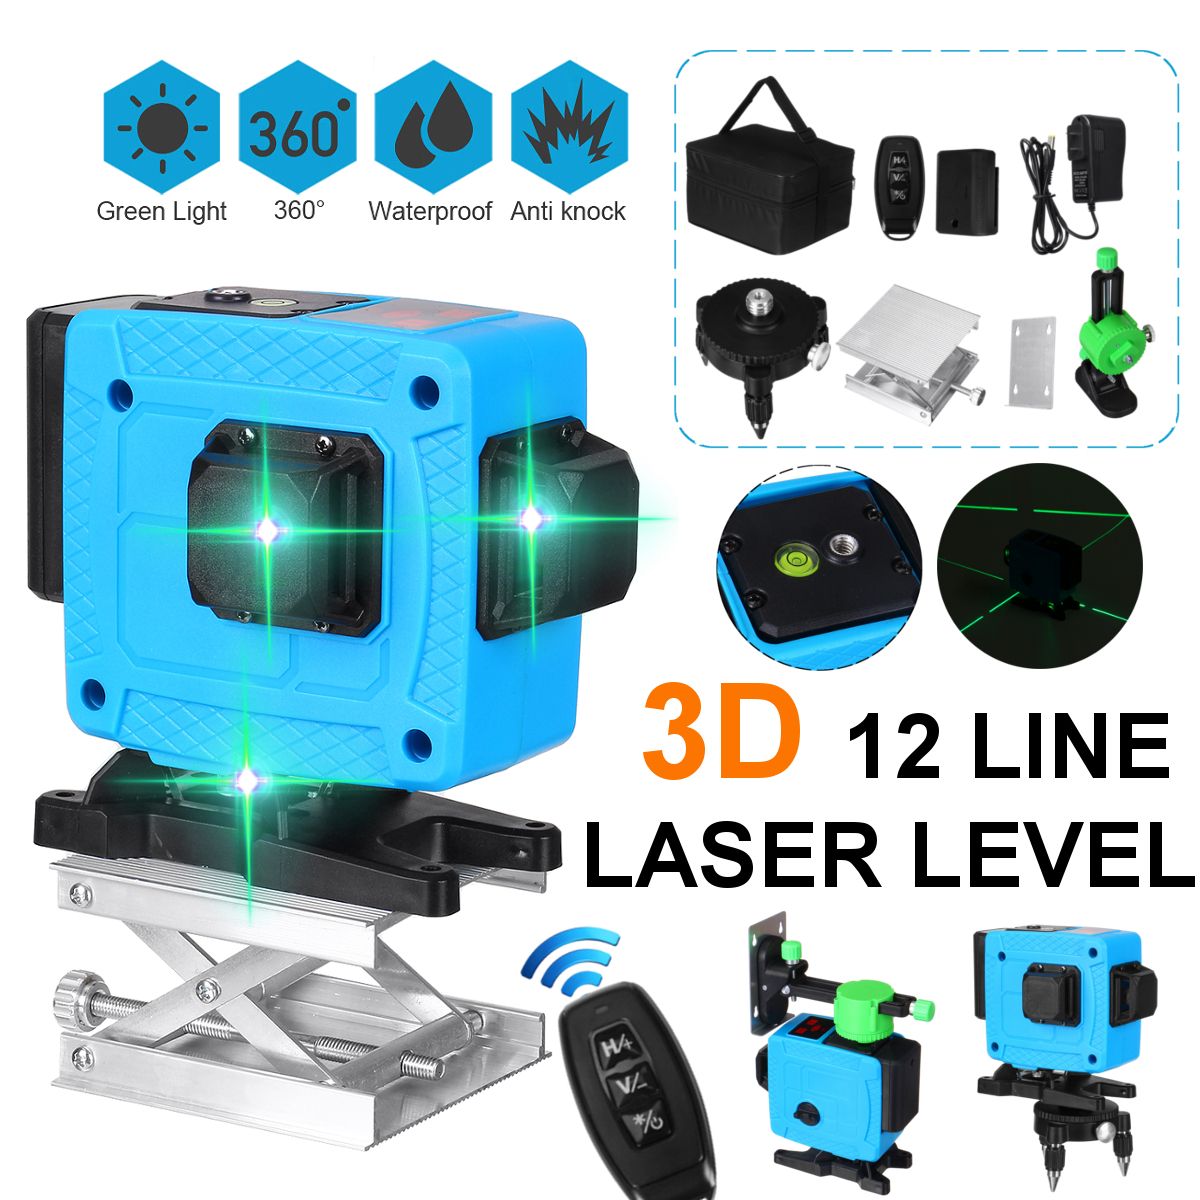 12-Line-Laser-Level-Green-Light-Self-Leveling-Cross-360deg-Rotary-Measure-with-Remote-1740211